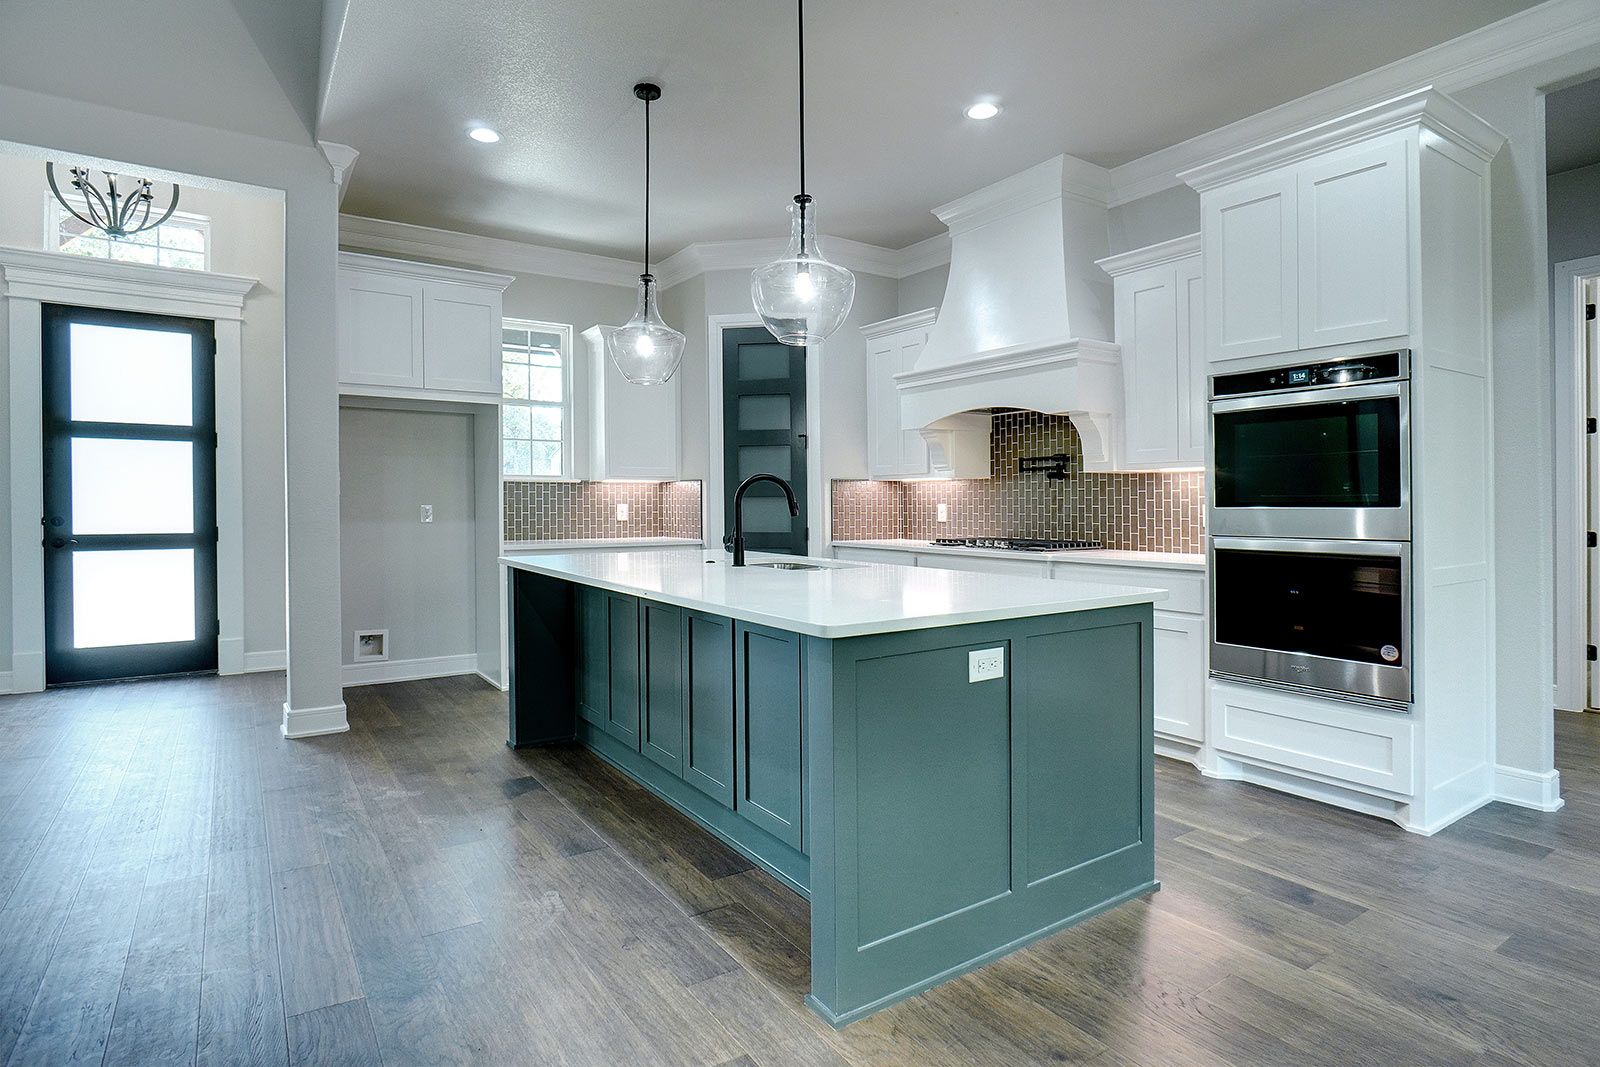 Home and kitchen remodel by Living Stone Construction